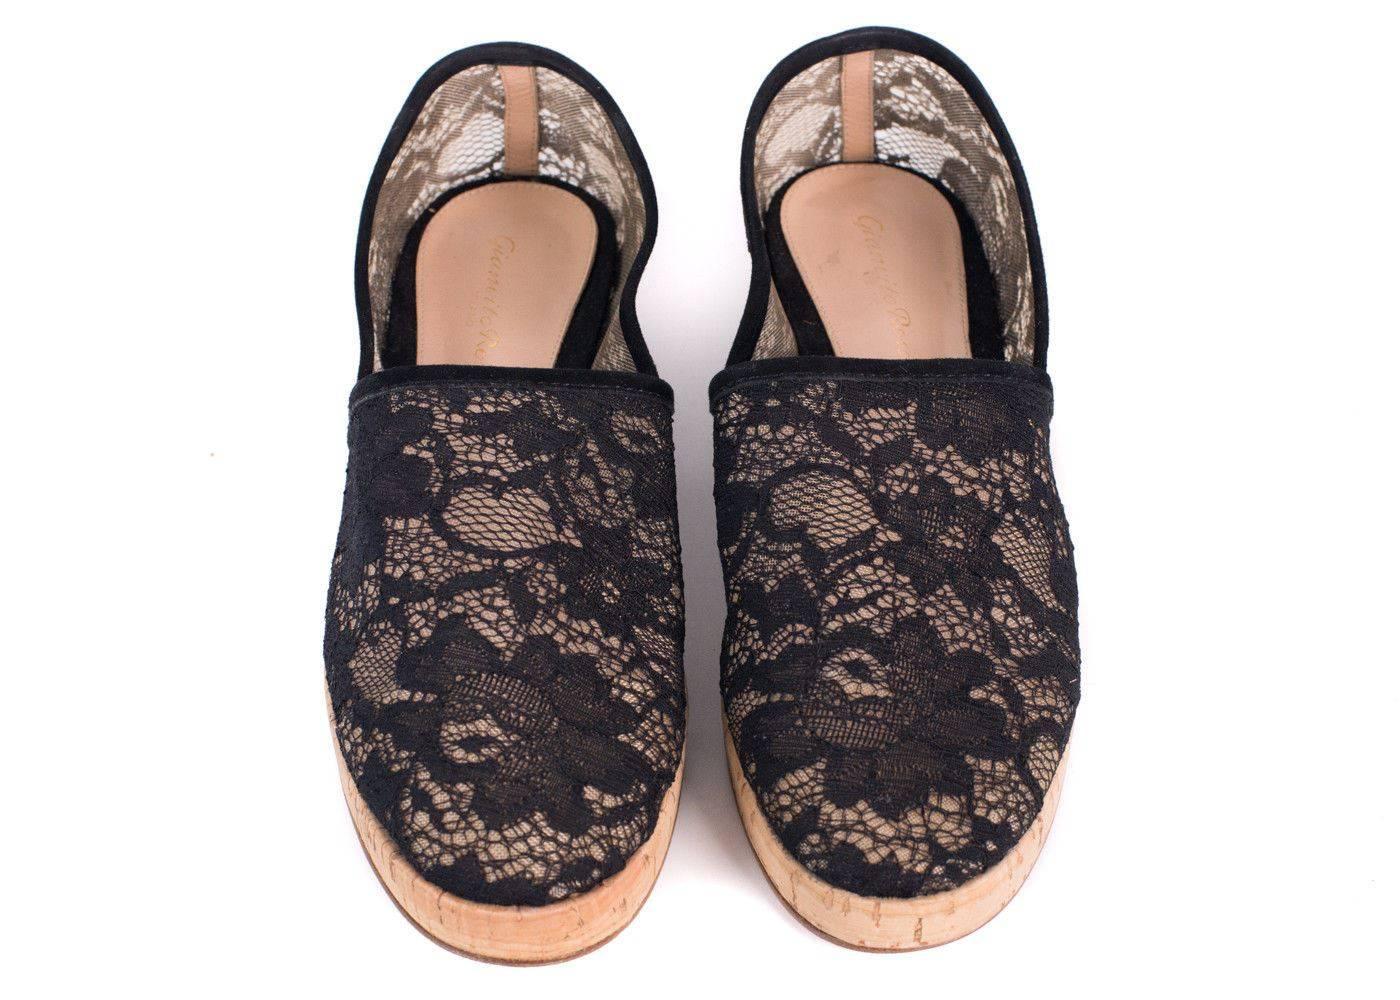 Brand New Gianvito Rossi Espadrille Flats
Retails In-Store & Online for $650
Size IT 37 / US 7

Remain artistically classic in your Gianvito Rossi Espadrille Flats. These shoes features an intricately laced floral design combined with a smooth cork